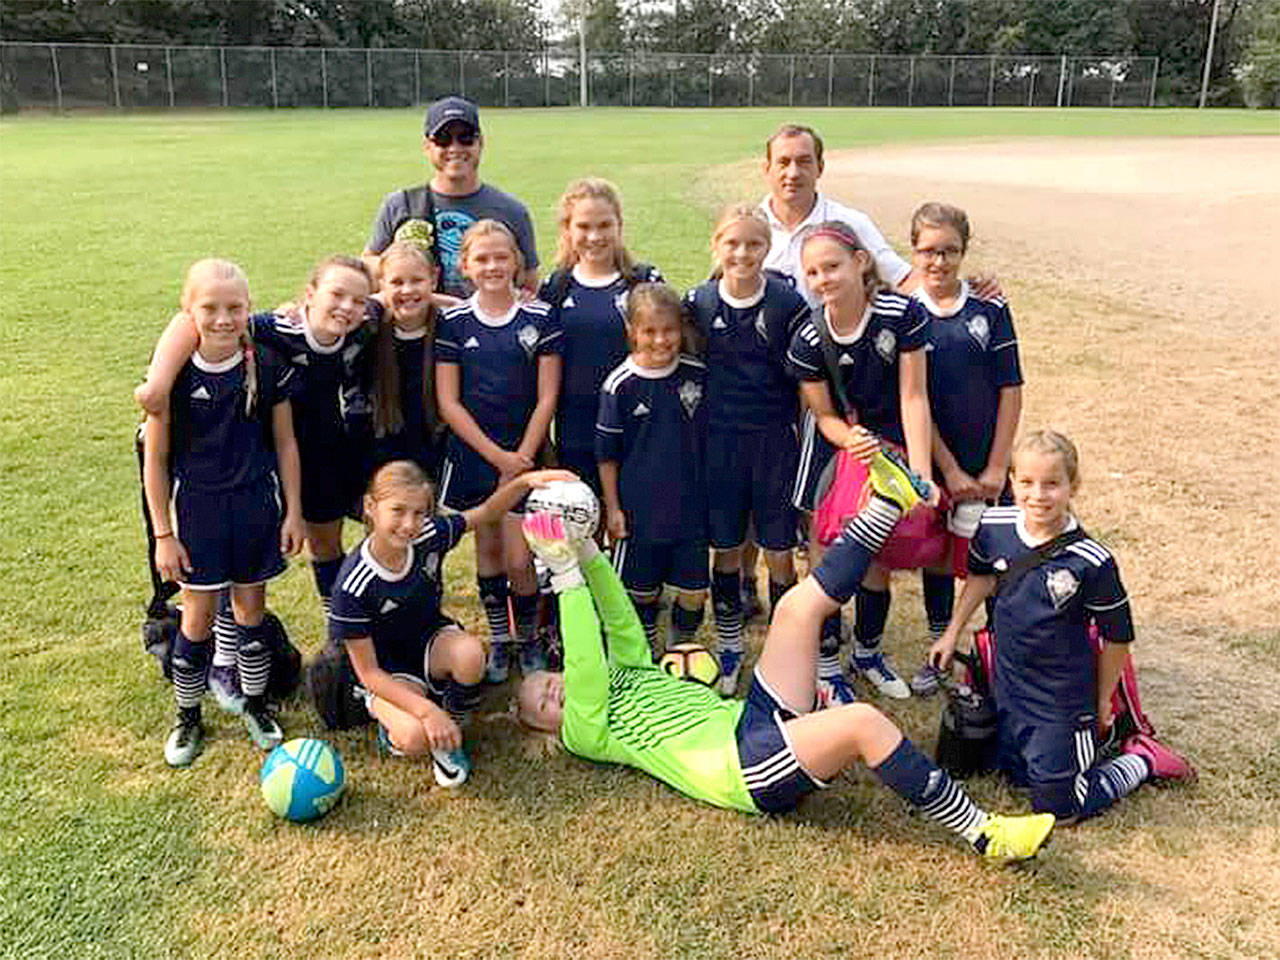 The Stormking girls U12 team from the Olympic Peninsula played in the Blast Off Tournament last weekend in Federal Way, going 3-0-1 to win the tournament. From left, front, are Taryn Johnson, Paige Mason and Kinzley Henrikson. From left, rear, are Isabelle Felton, Becca Van Dyken, Cami Bohman, Eve Breithaupt, Chloe Ferro-May, Raimey Brewer, Jolene Vaara, Waverly Mead and Julia Raupp. The coaches are Dustin Curb and Jay Marazon.